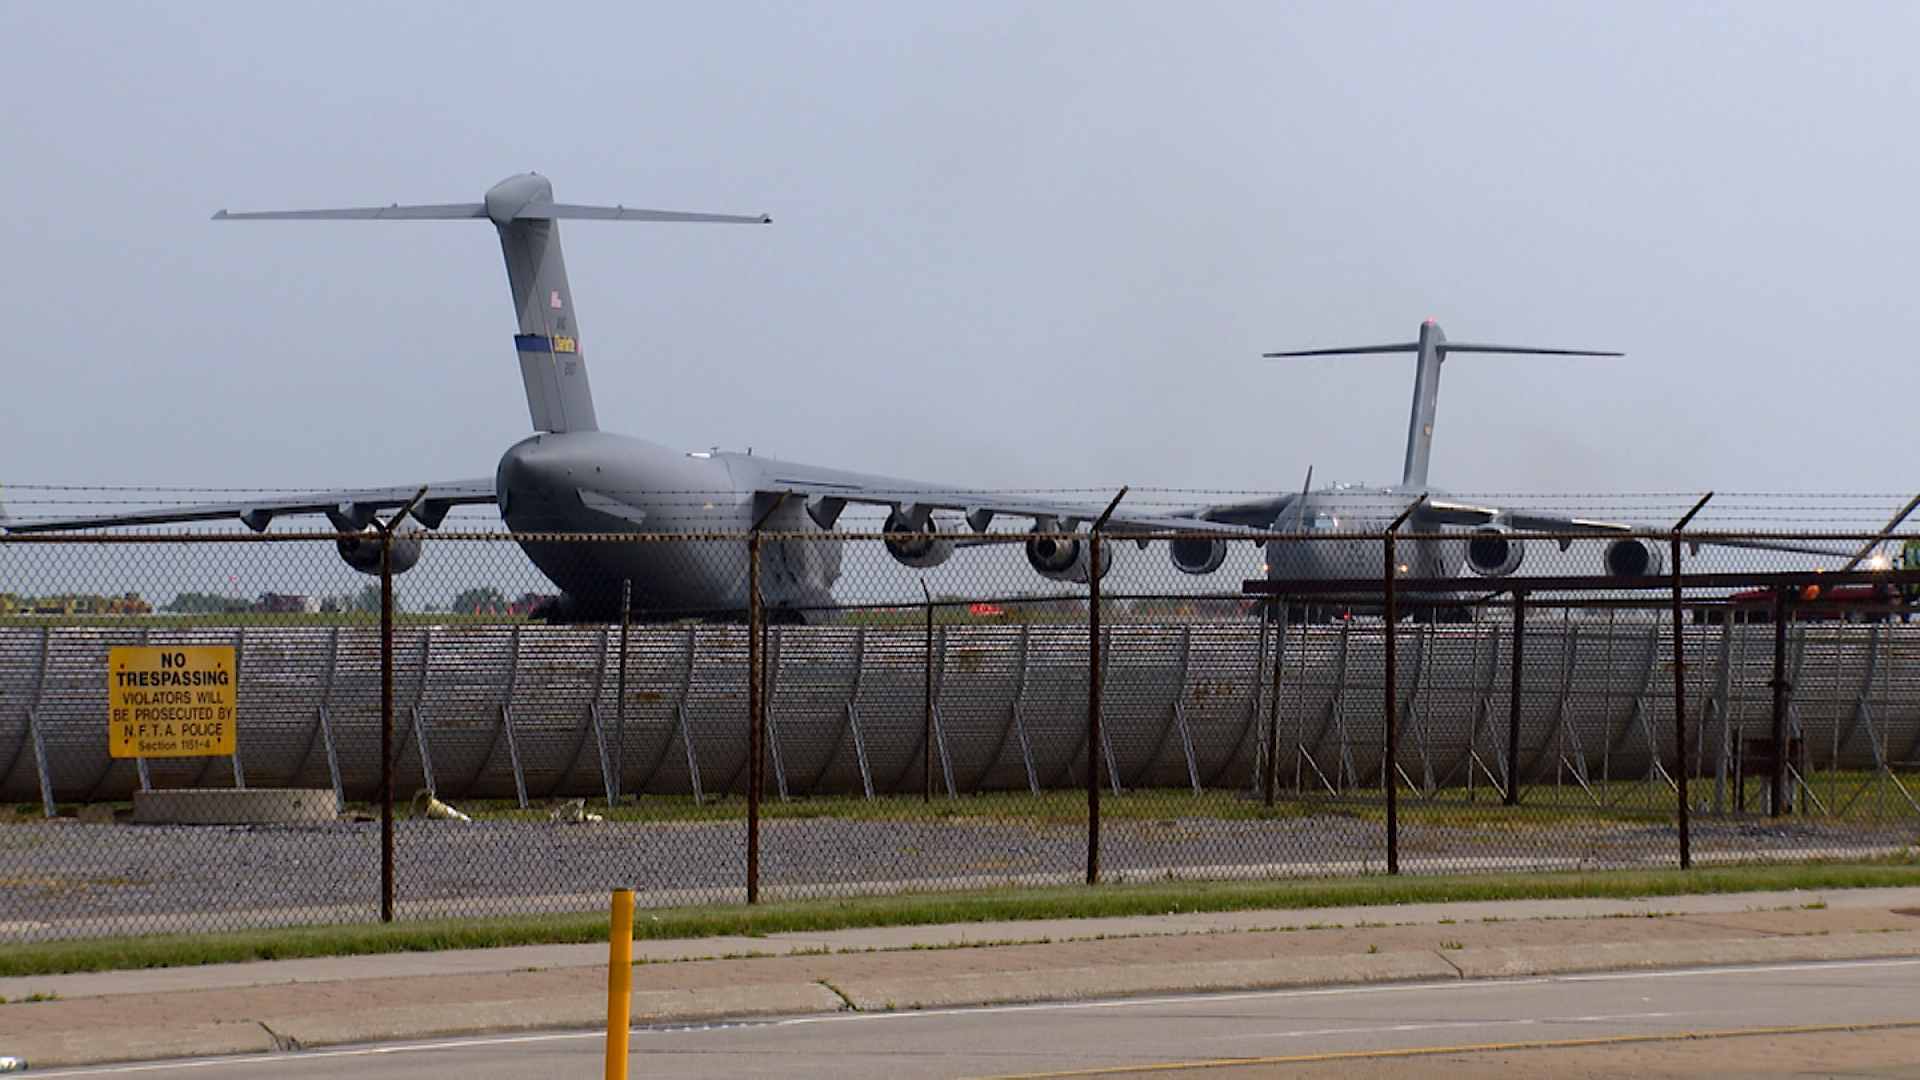 A pair of C-17s are seen at Buffalo Niagara International Airport on Tuesday.